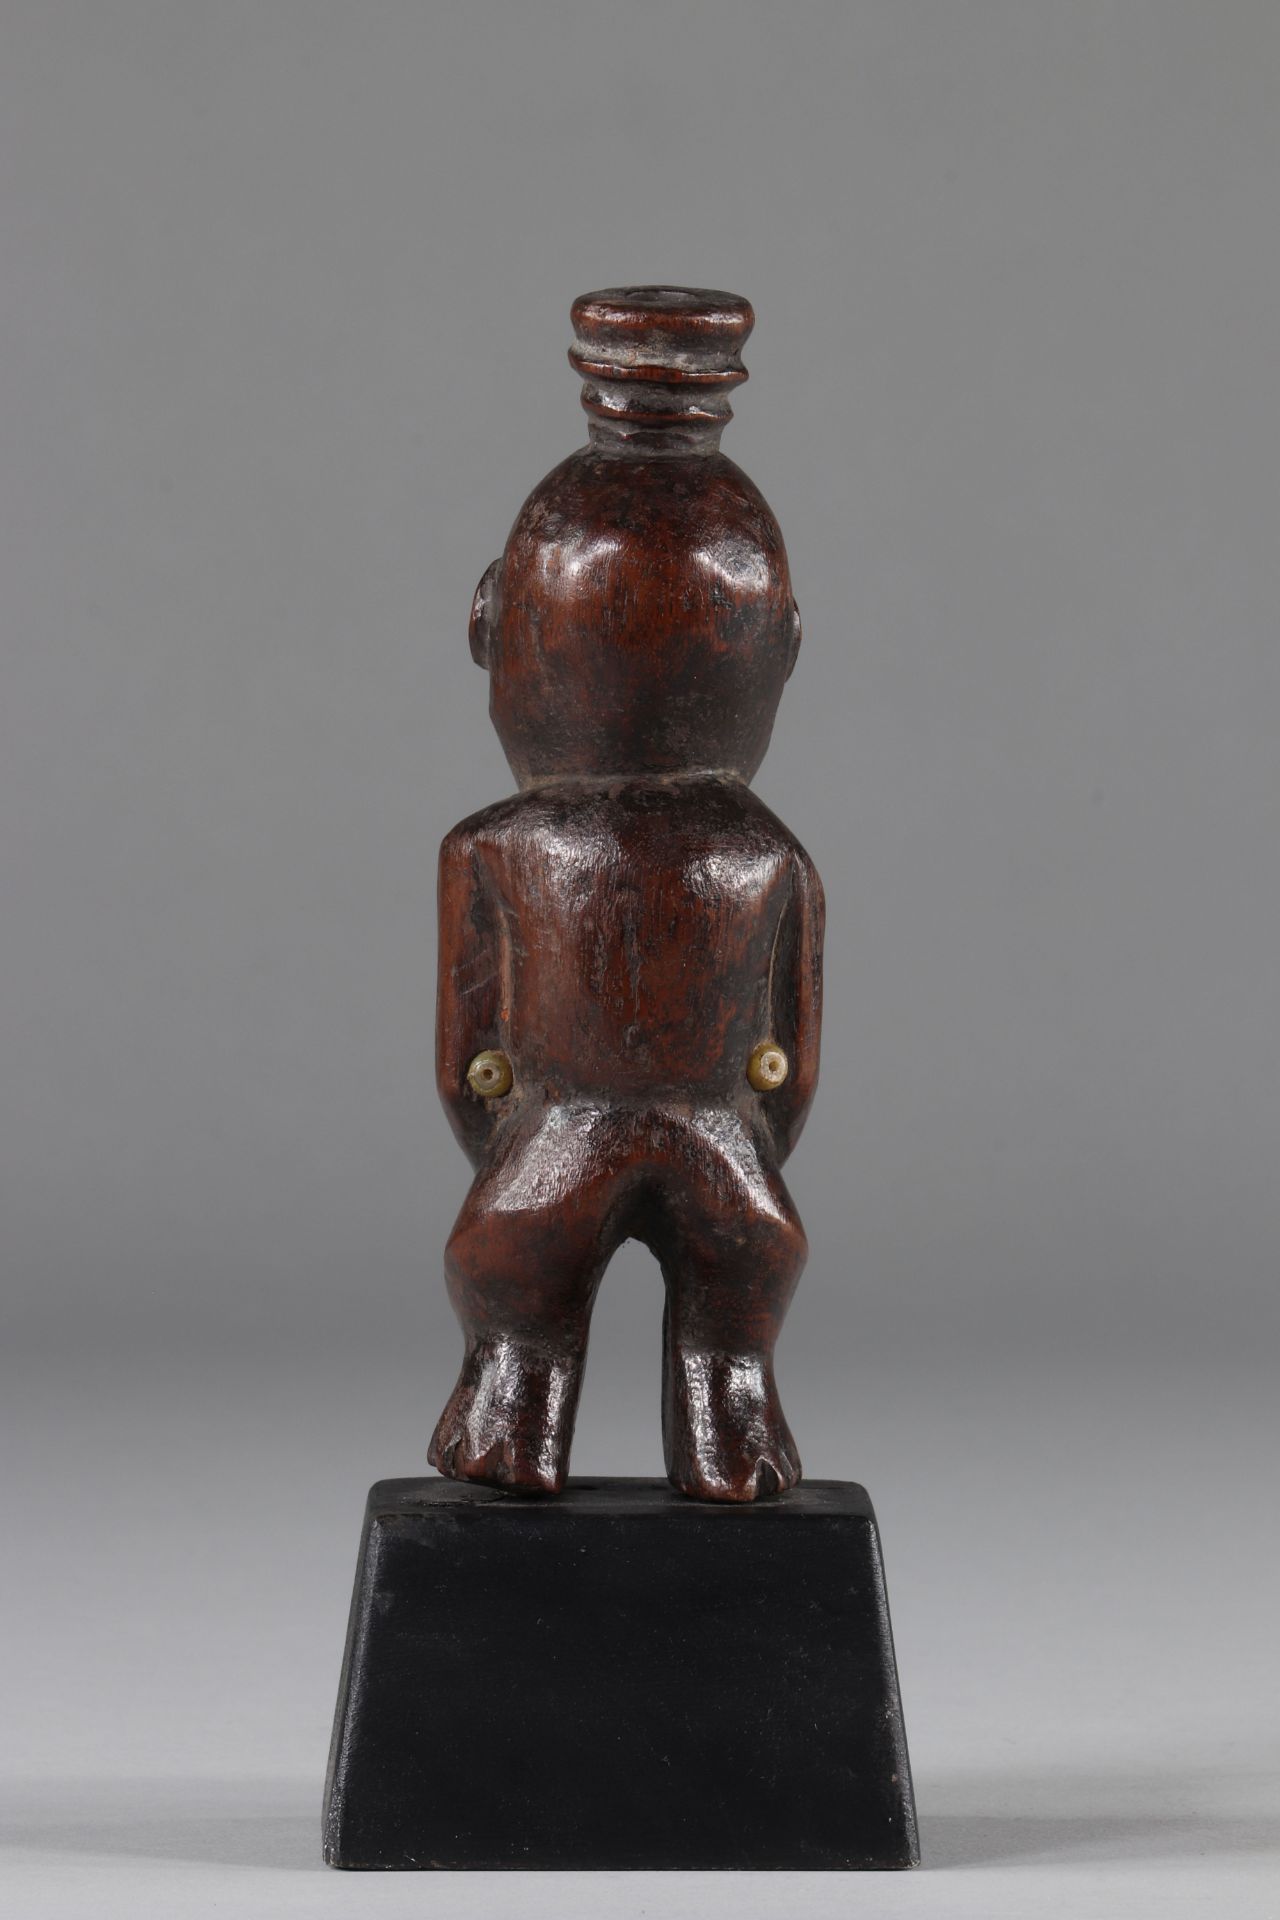 Kusu, DRC, Fetish representing wisdom, wood, glass beads, old patina of use, late 19th early 20th ce - Image 3 of 4